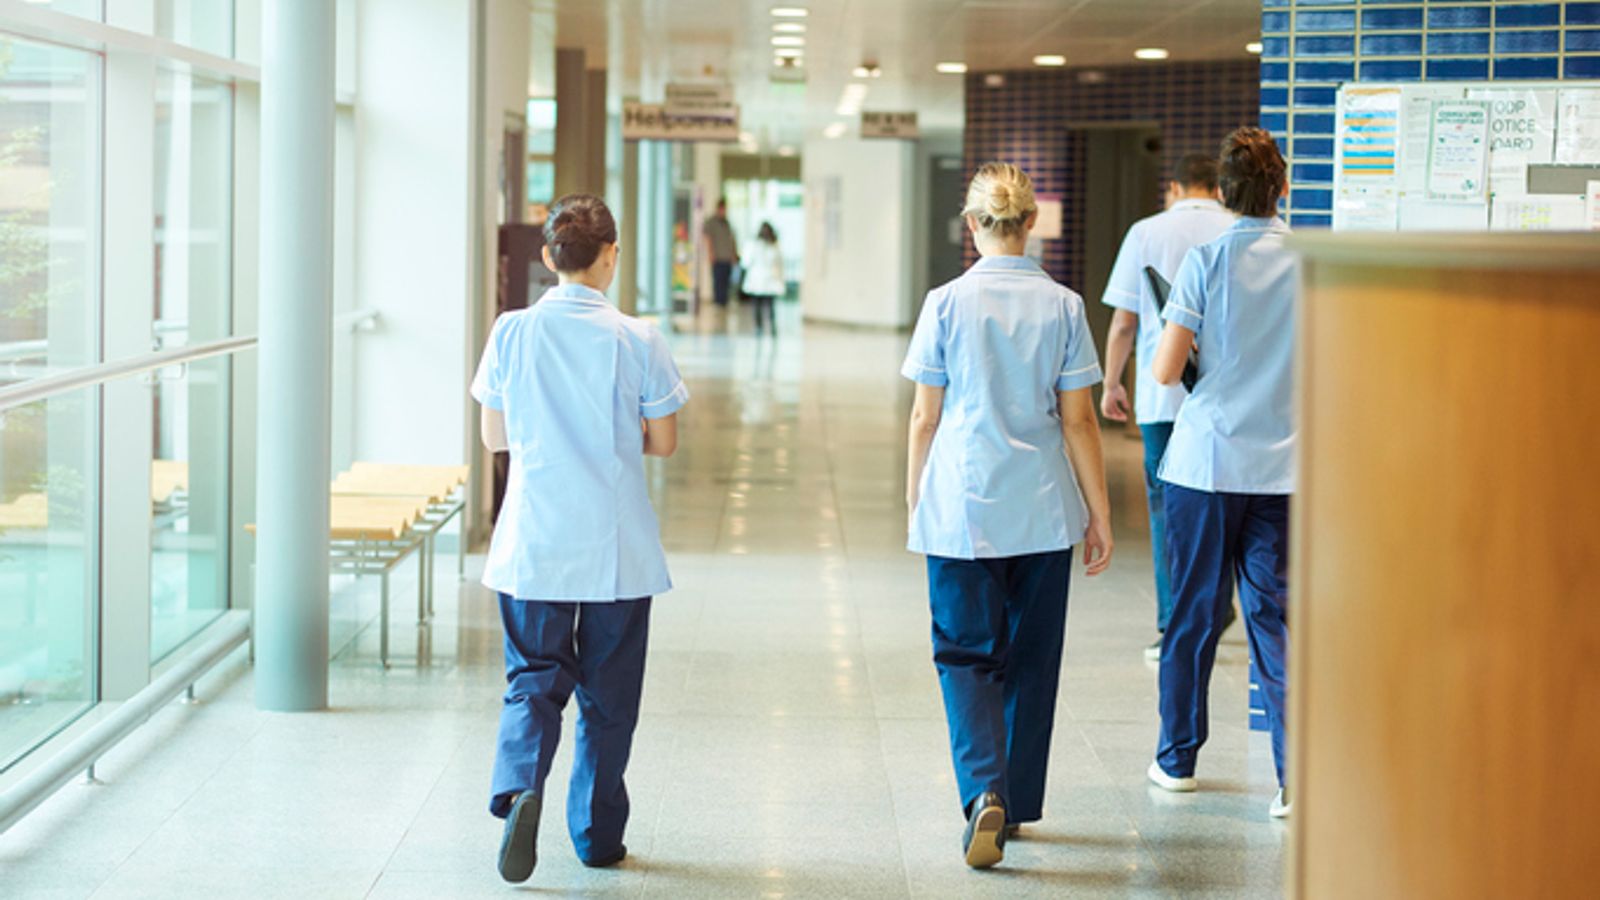 Doctors demand 30% pay rise as some medics say they may have to go on strike